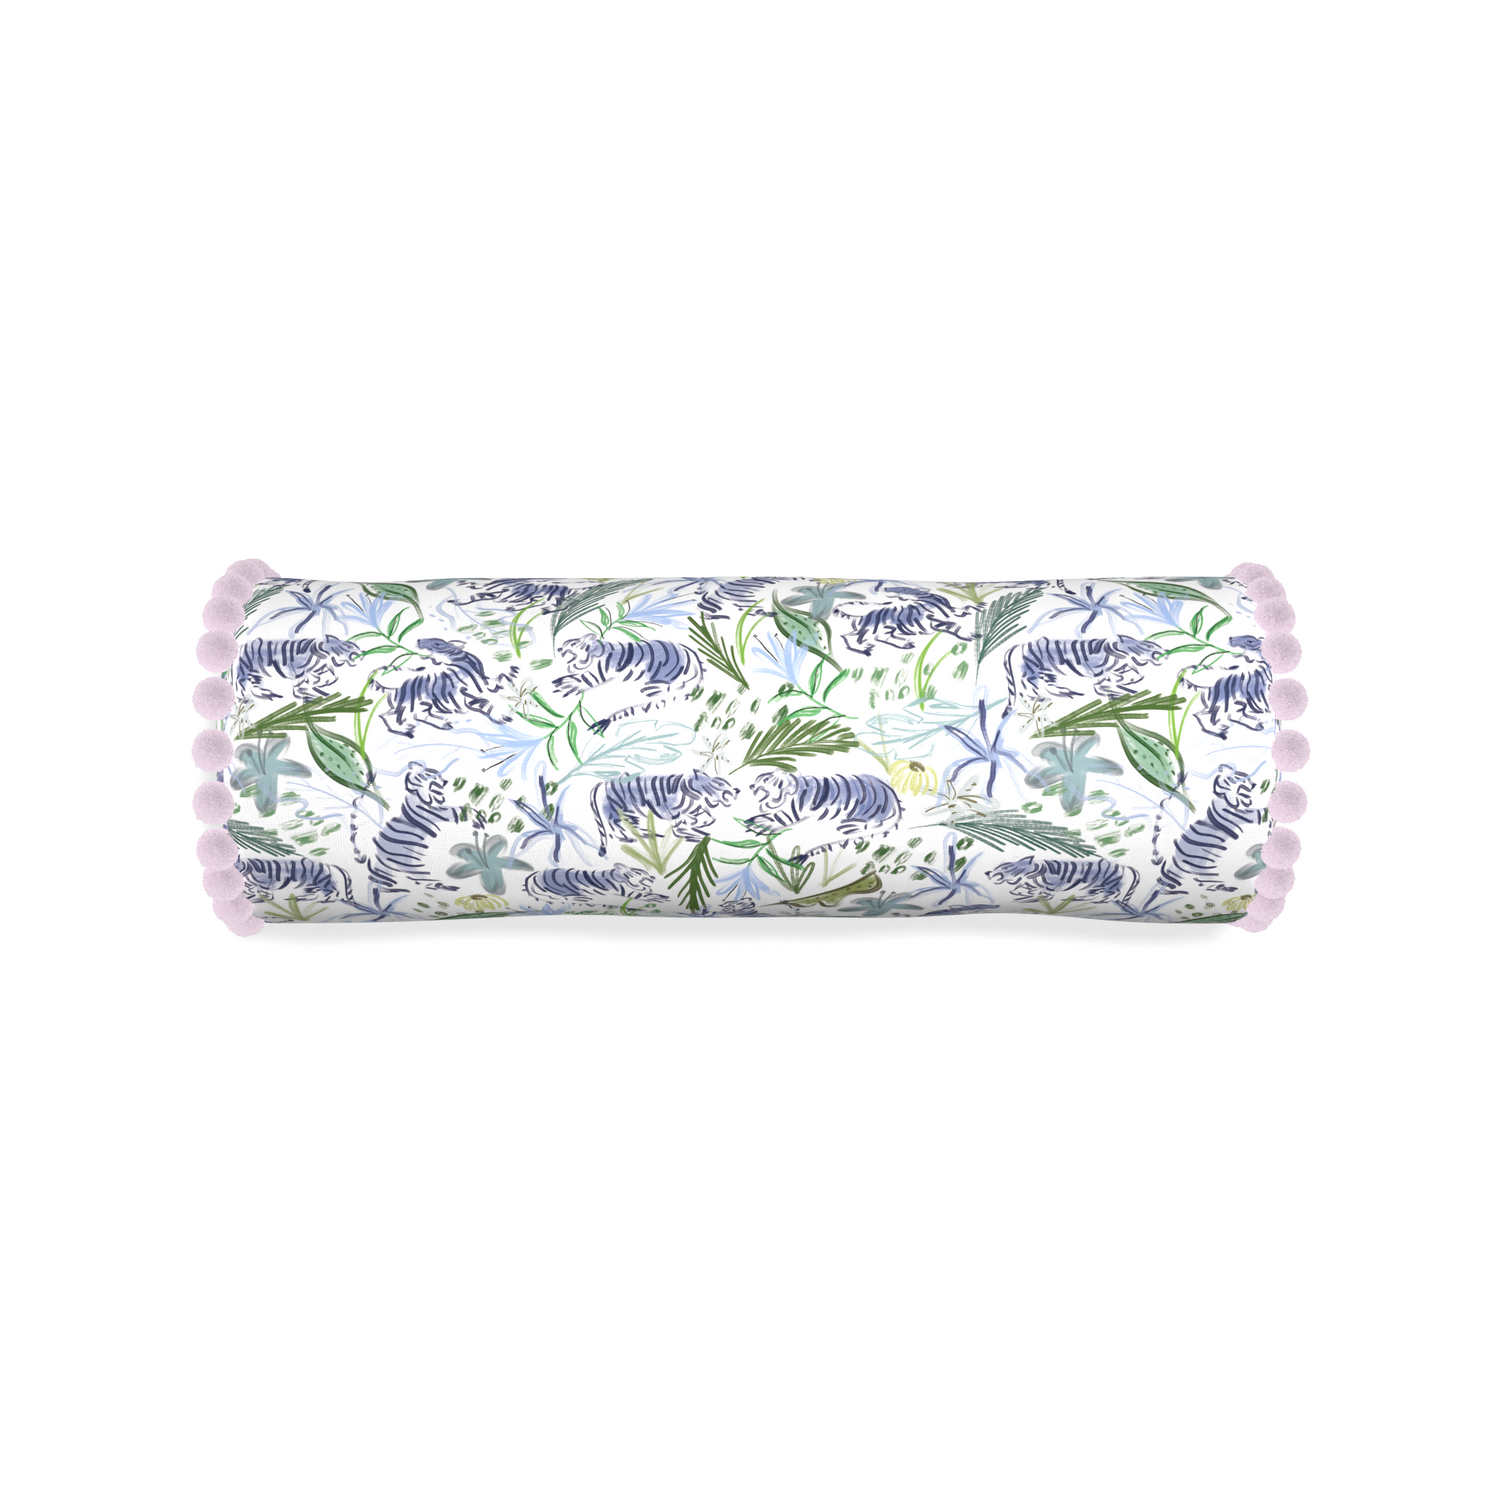 Bolster frida green custom green tigerpillow with l on white background